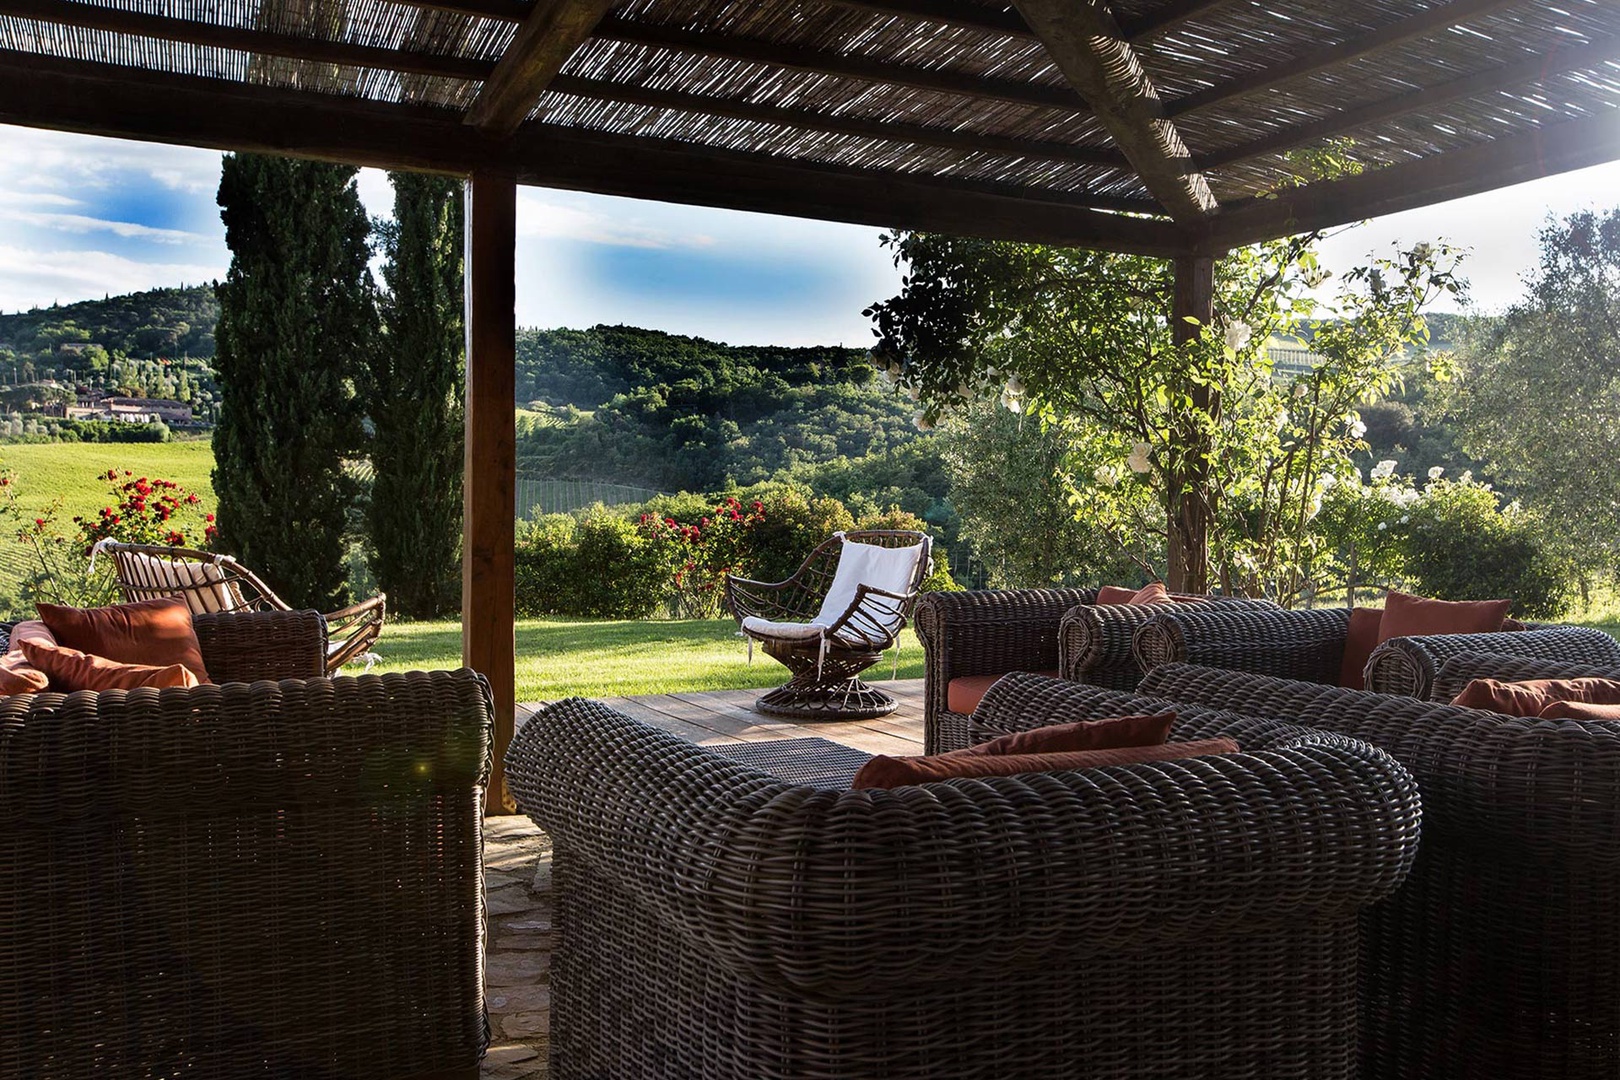 Take in the beautiful hillside from the terrace.